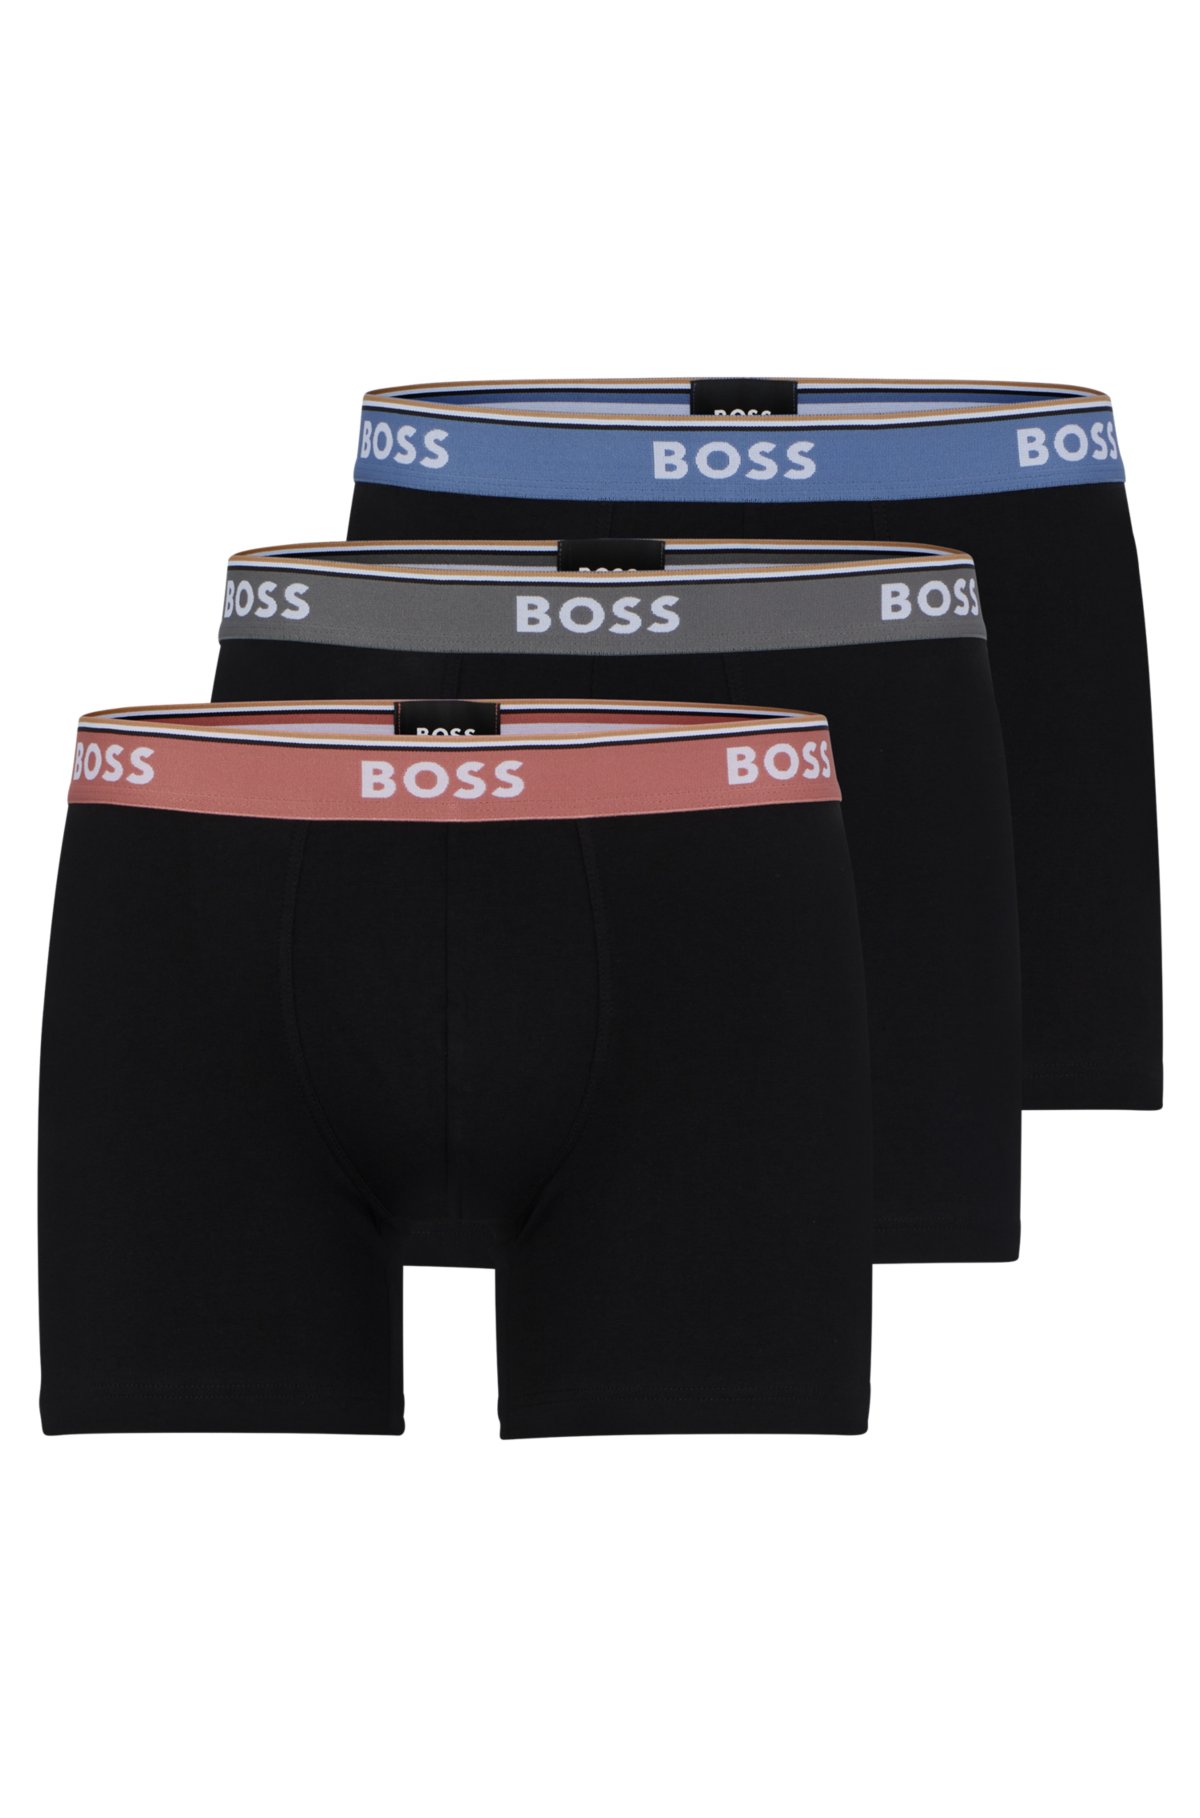 Three-pack briefs BOSS logo boxer waistbands with - of